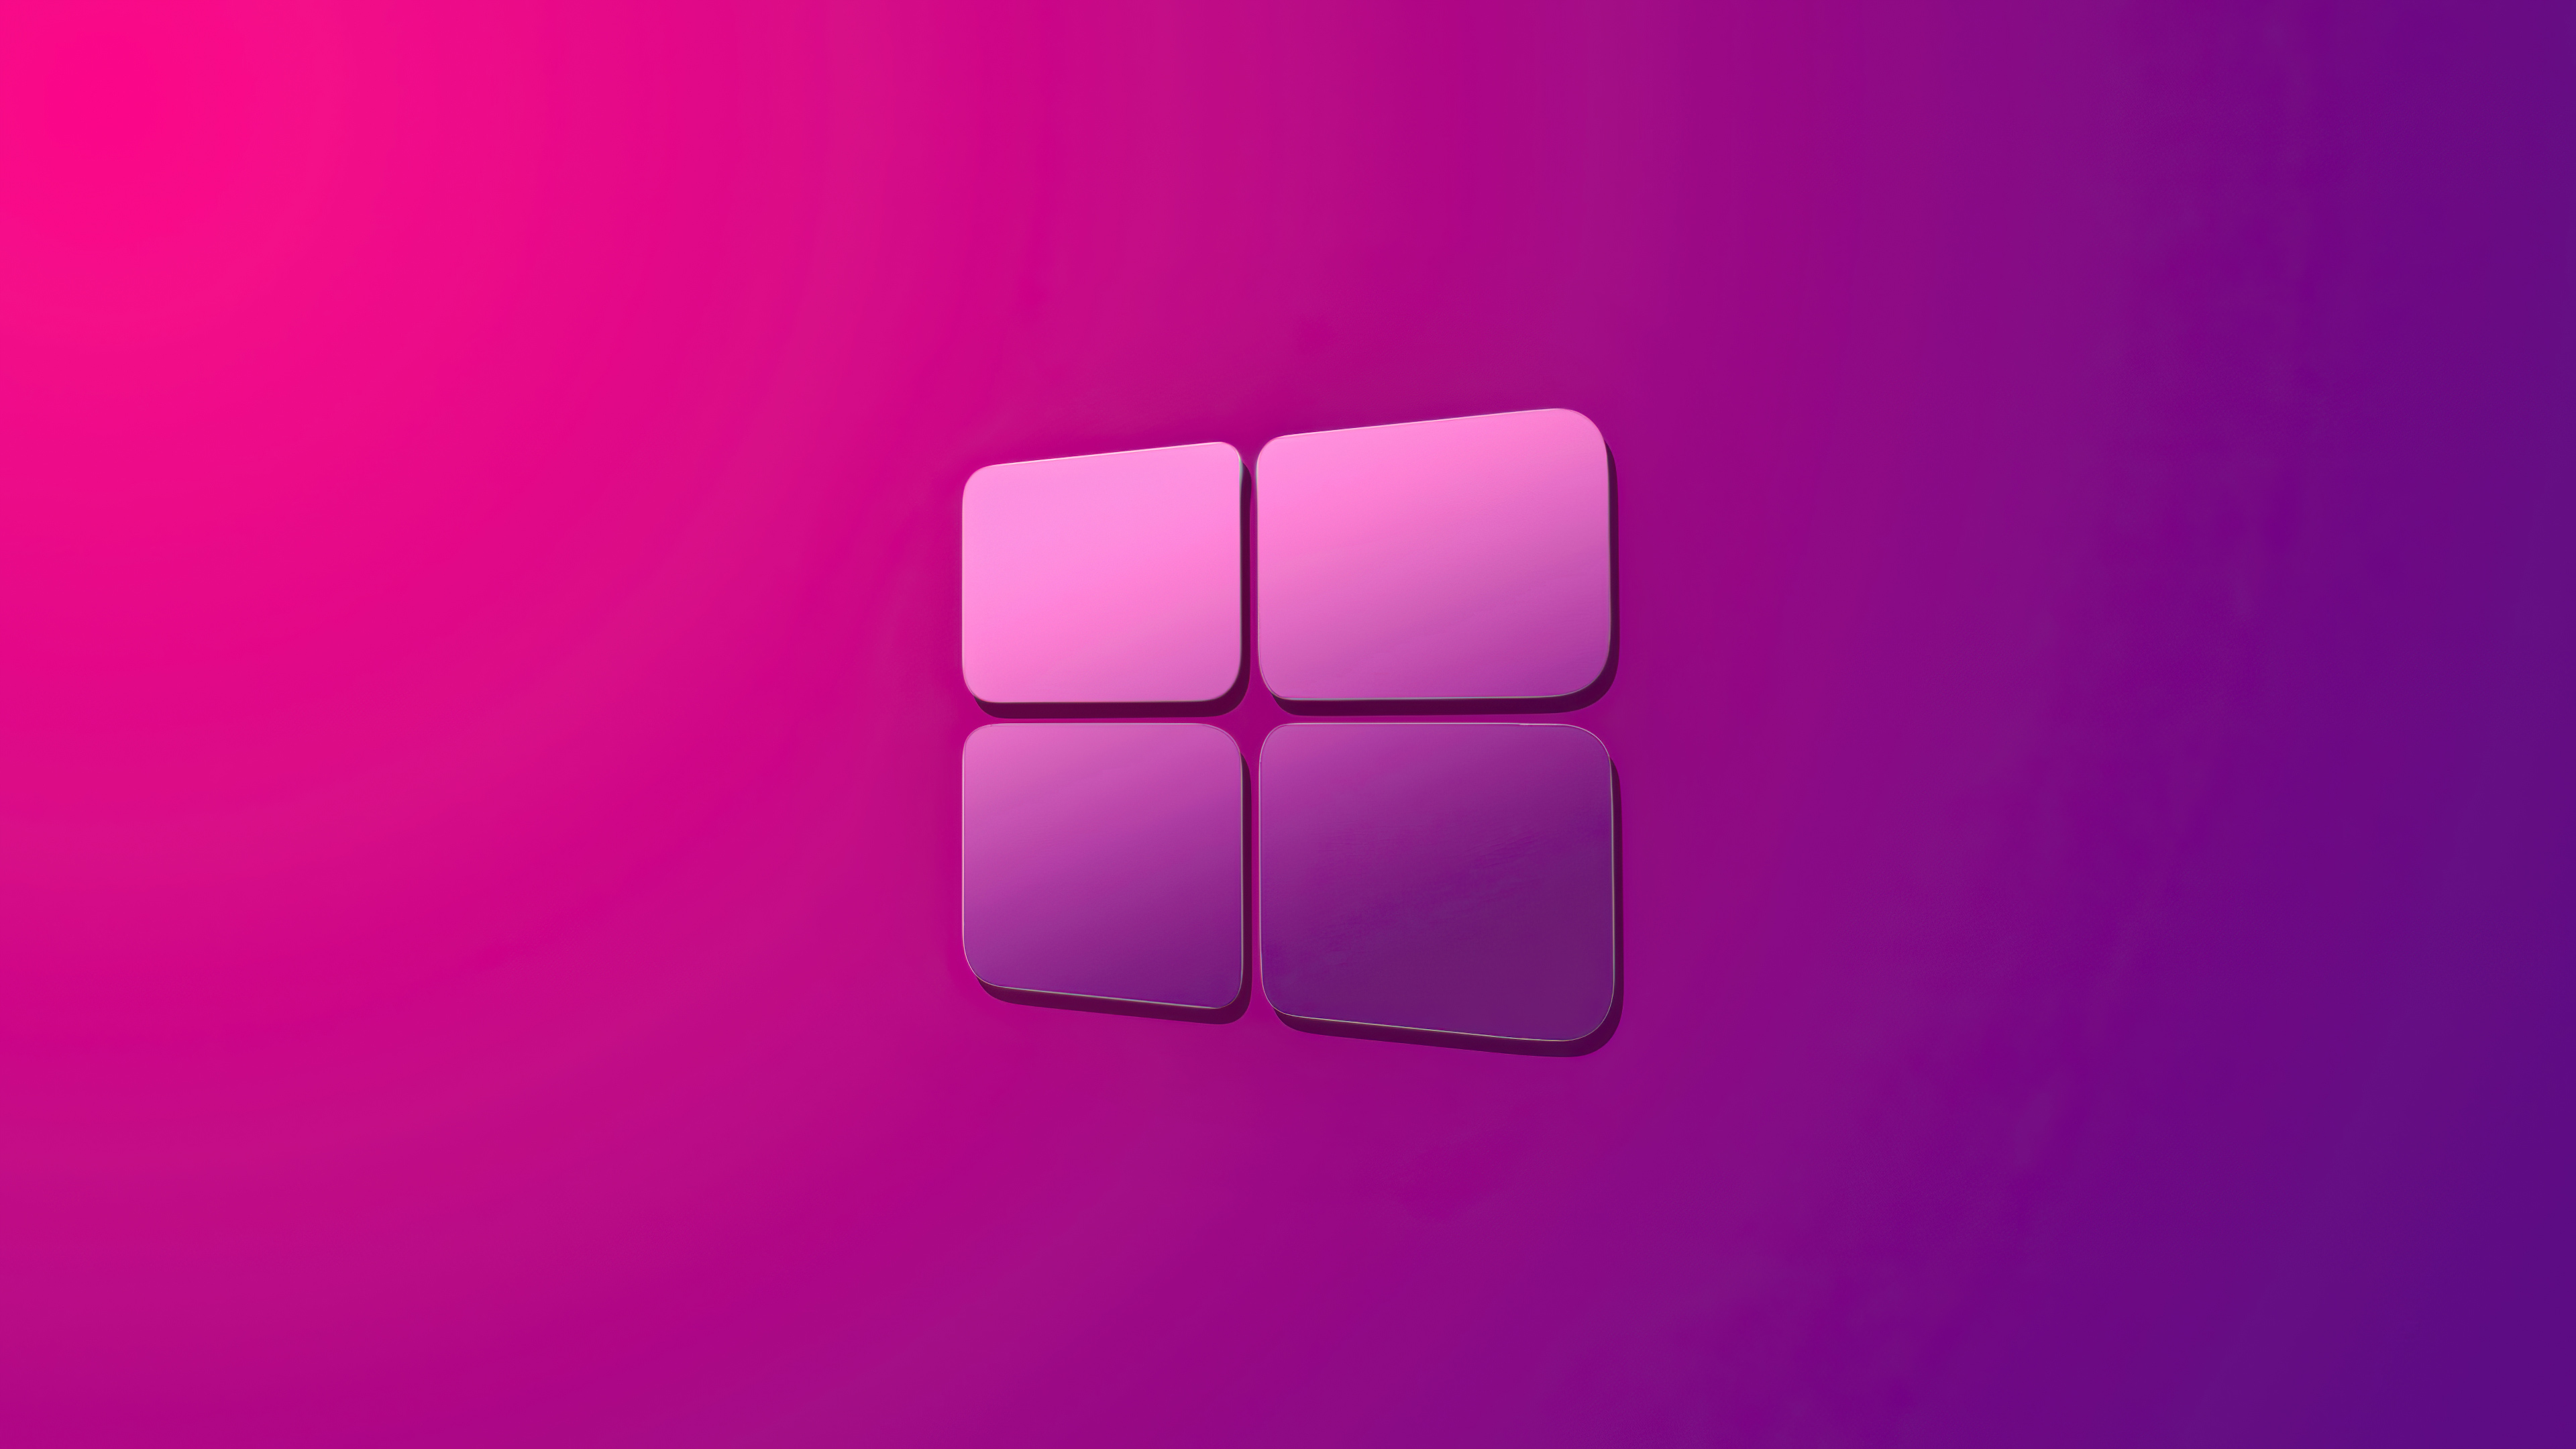 1366x768 Windows 10 Pink Purple Gradient Logo 4k 1366x768 Resolution Hd 4k Wallpapers Images Backgrounds Photos And Pictures